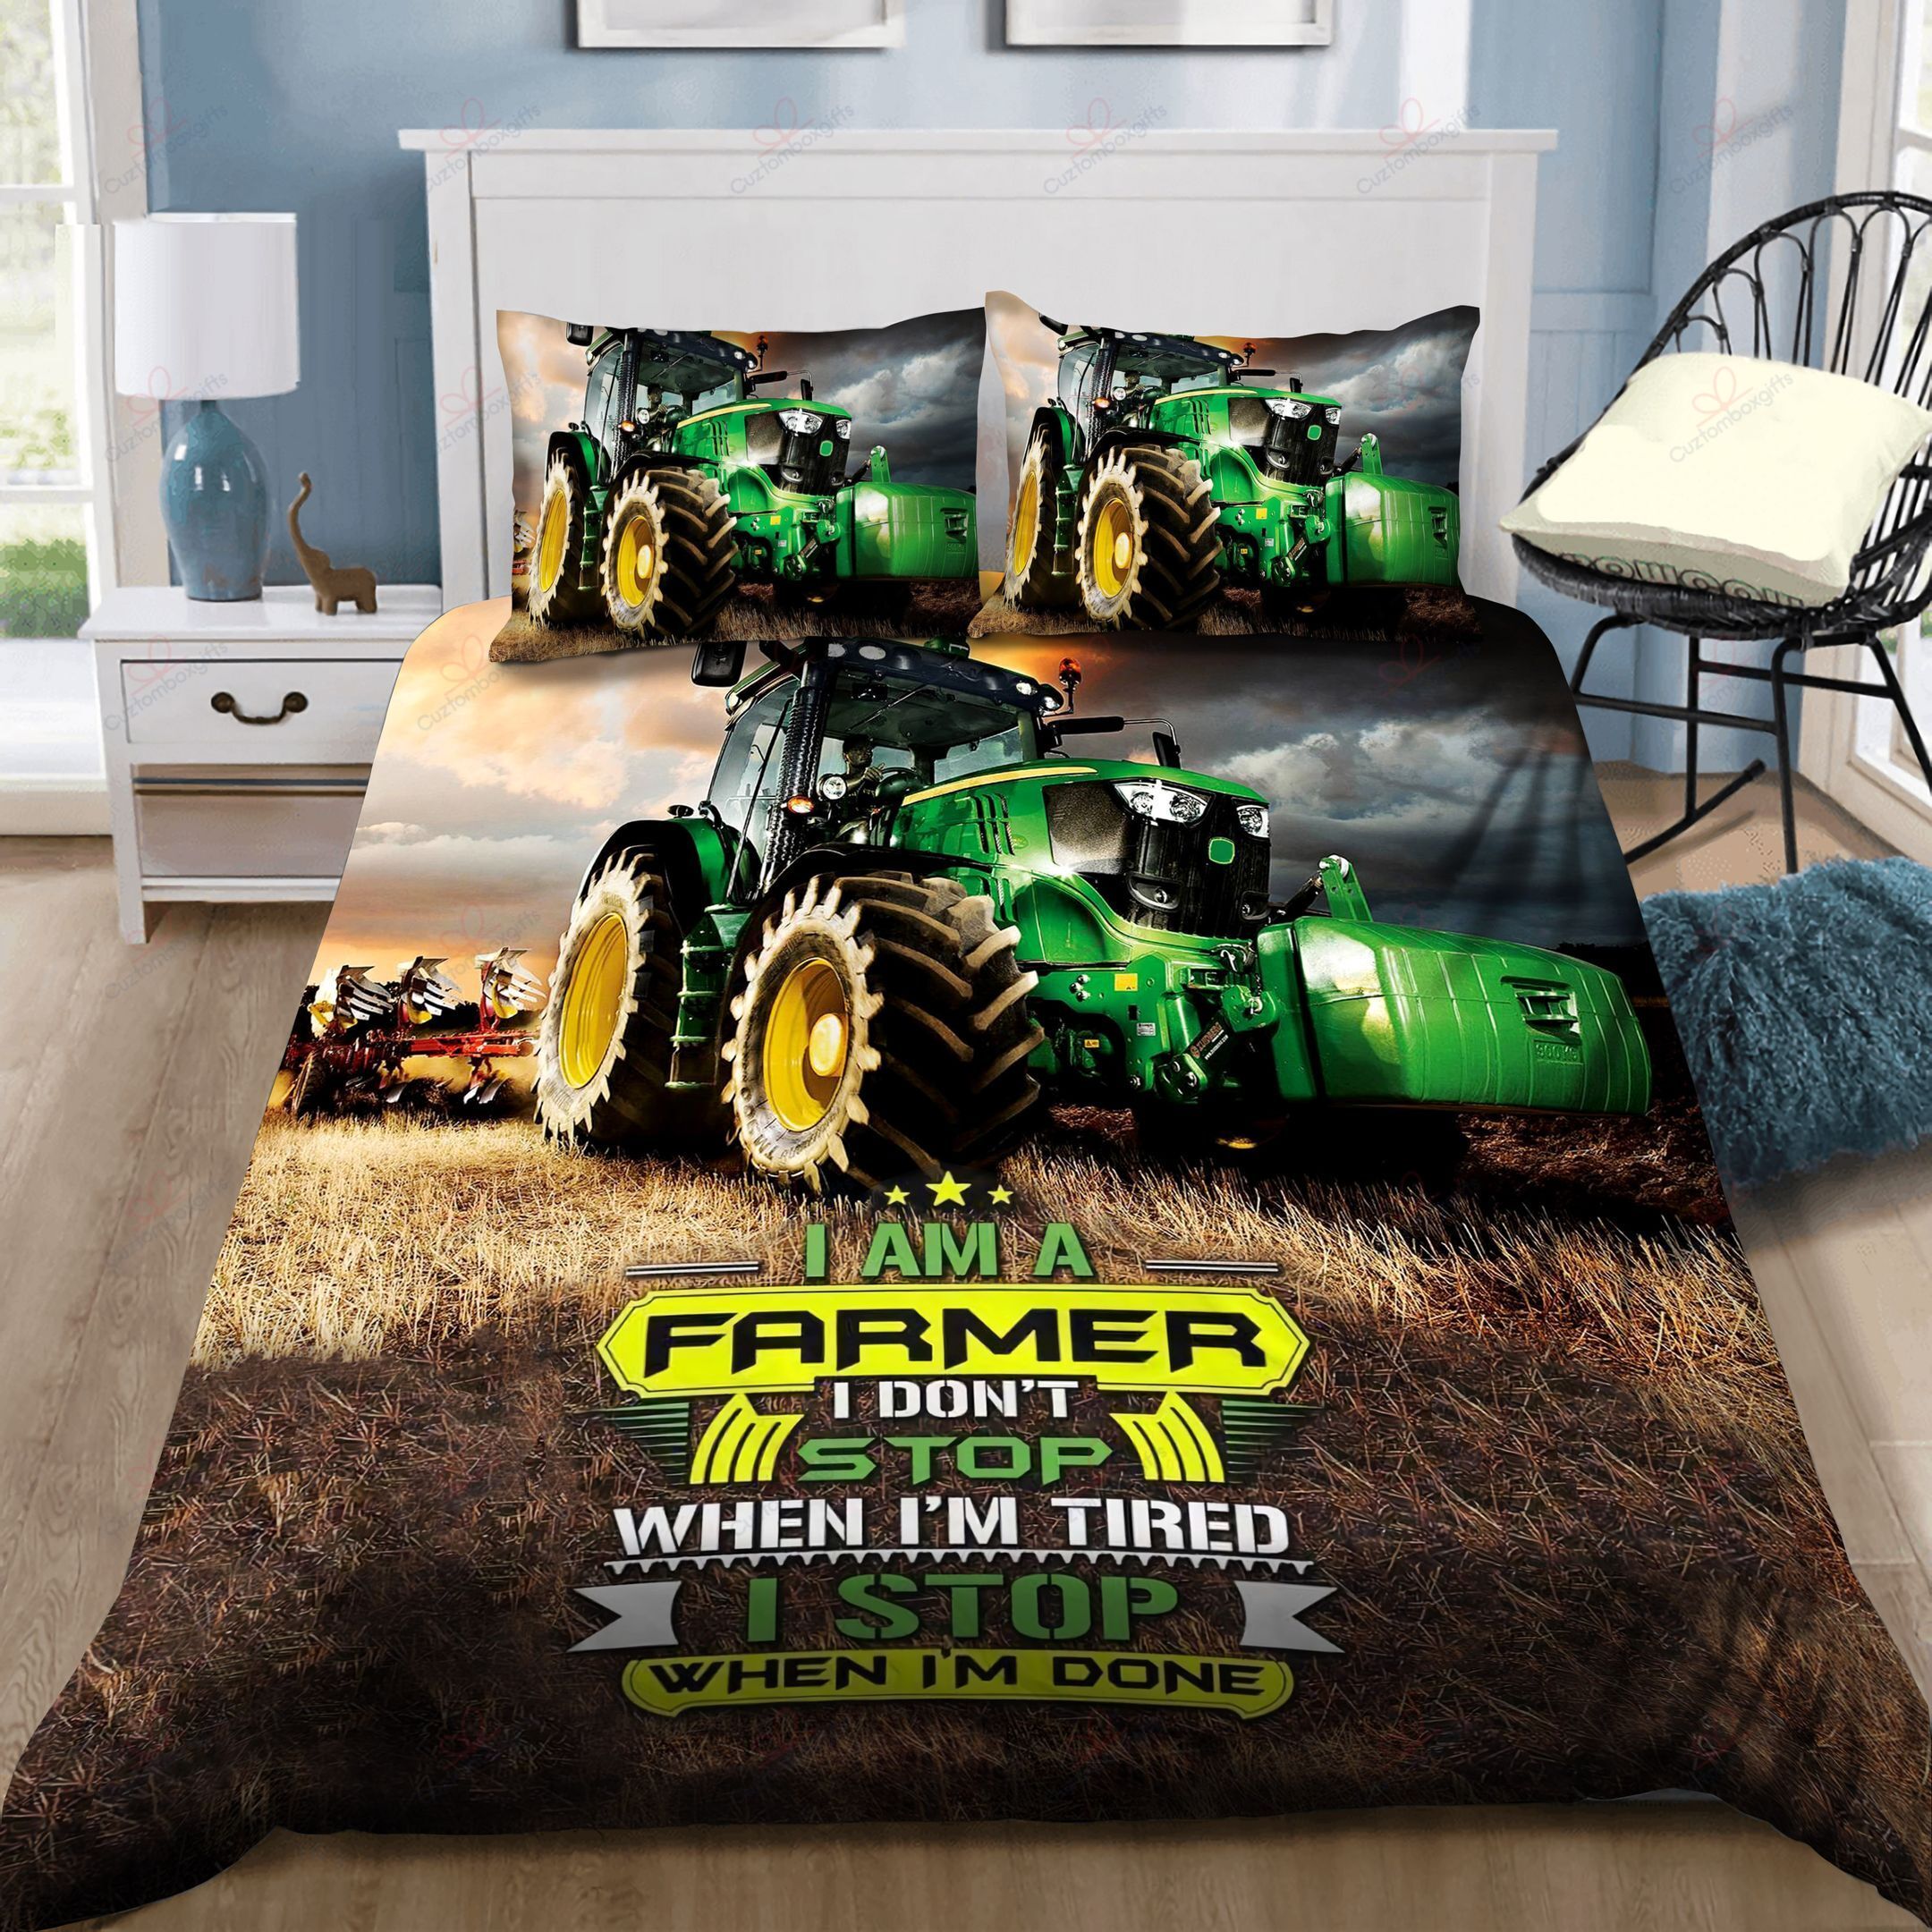 Jd Tractor Art Bedding Set Njcm1zl69e, Tractor Bedding Twin